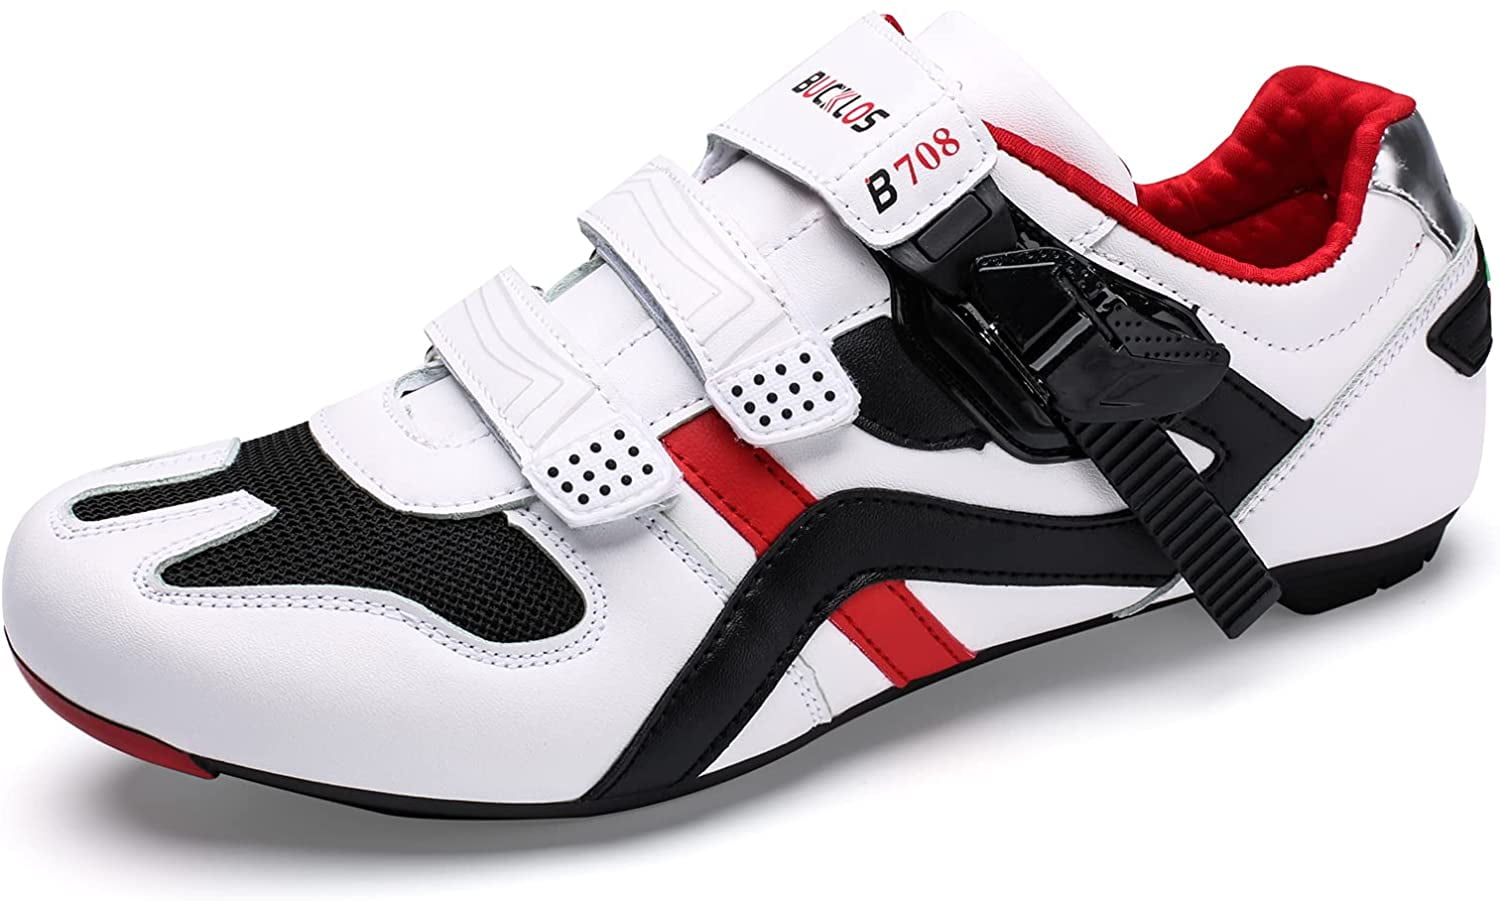 Details about   Professional Men Nonslip Road Cycling Sneakers Outdoor Bicycle Riding Bike Shoes 